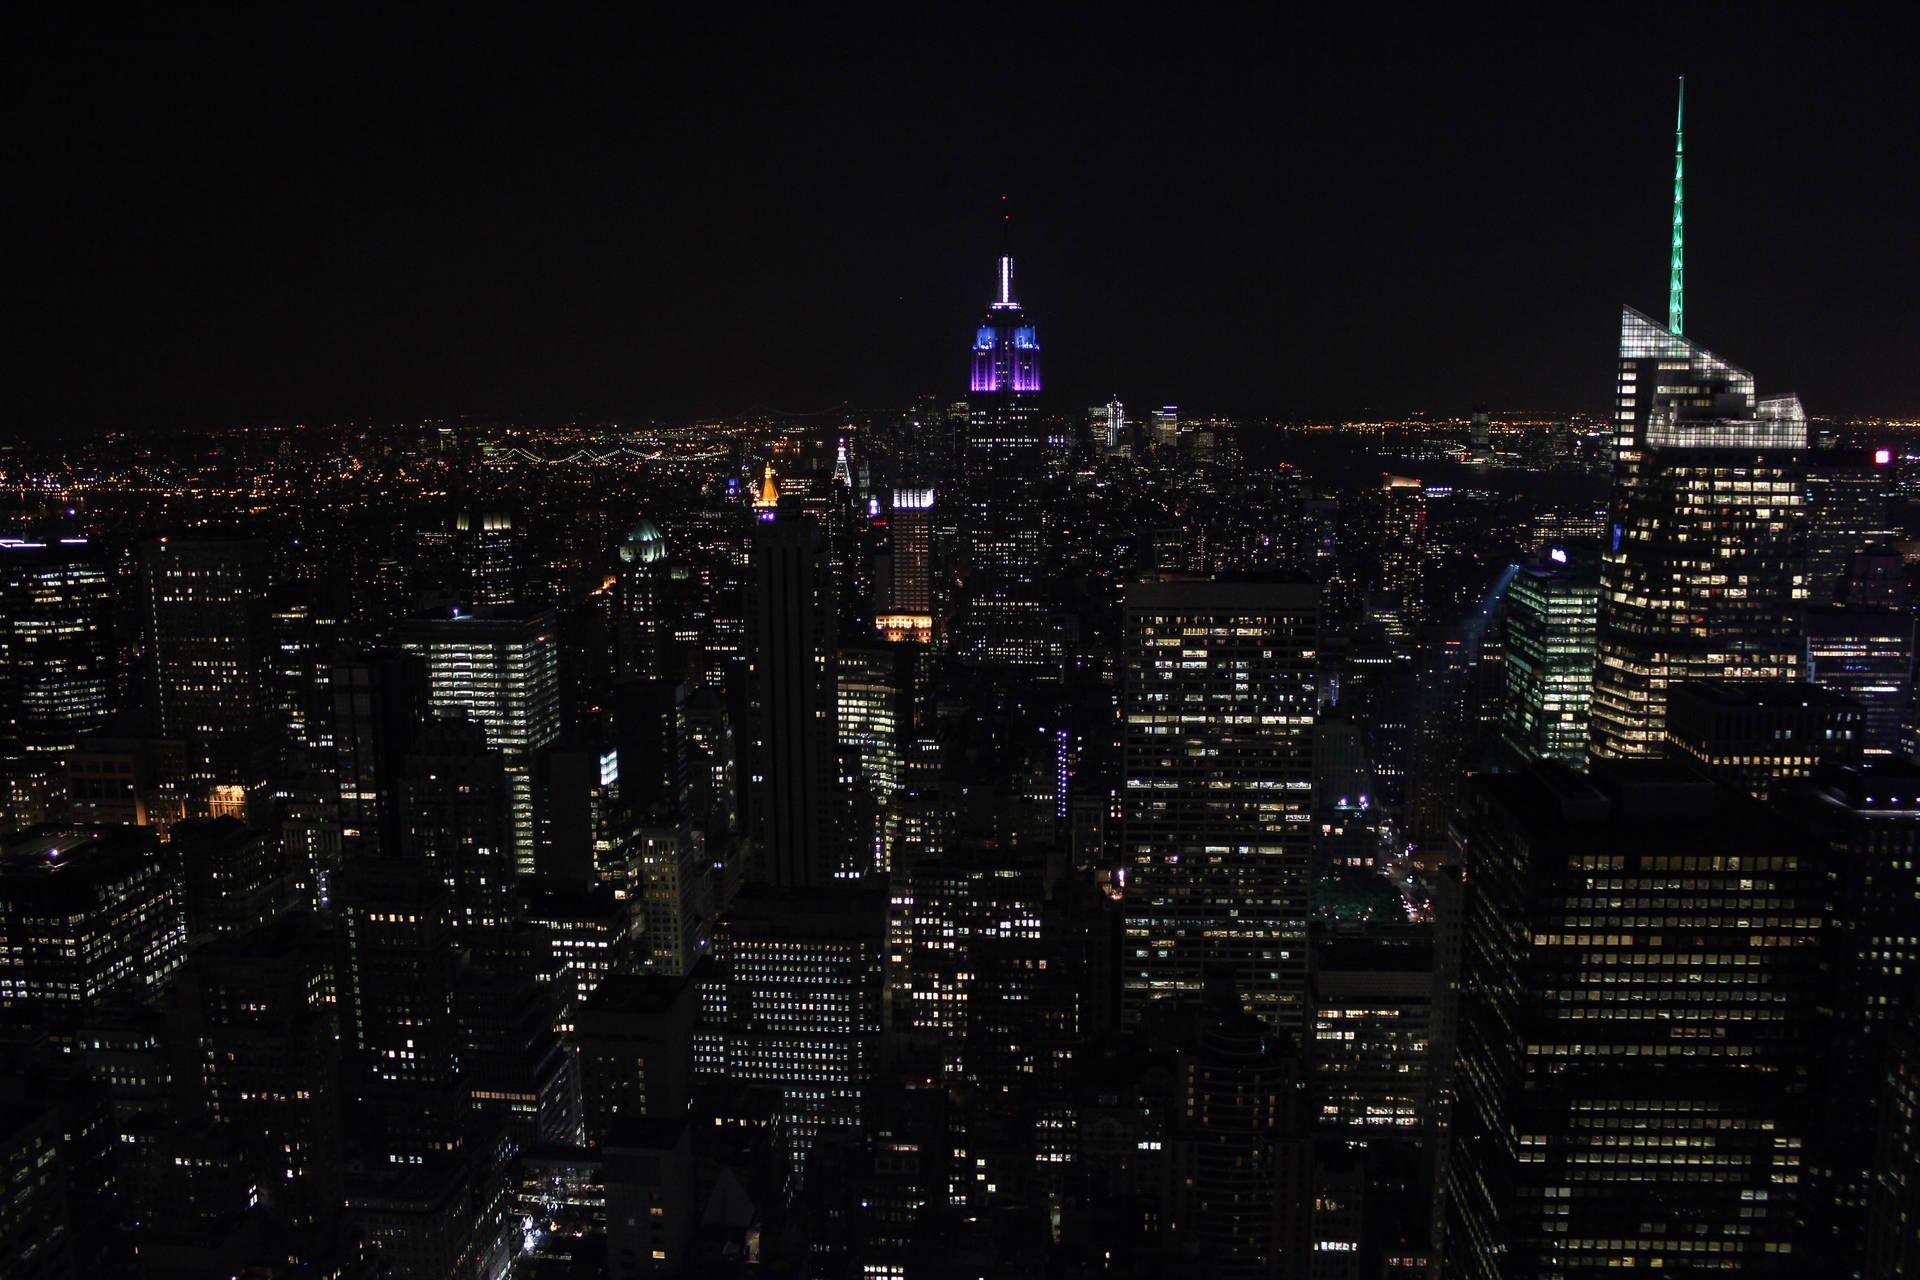 A night time view of the city from the top of the Rock. - New York